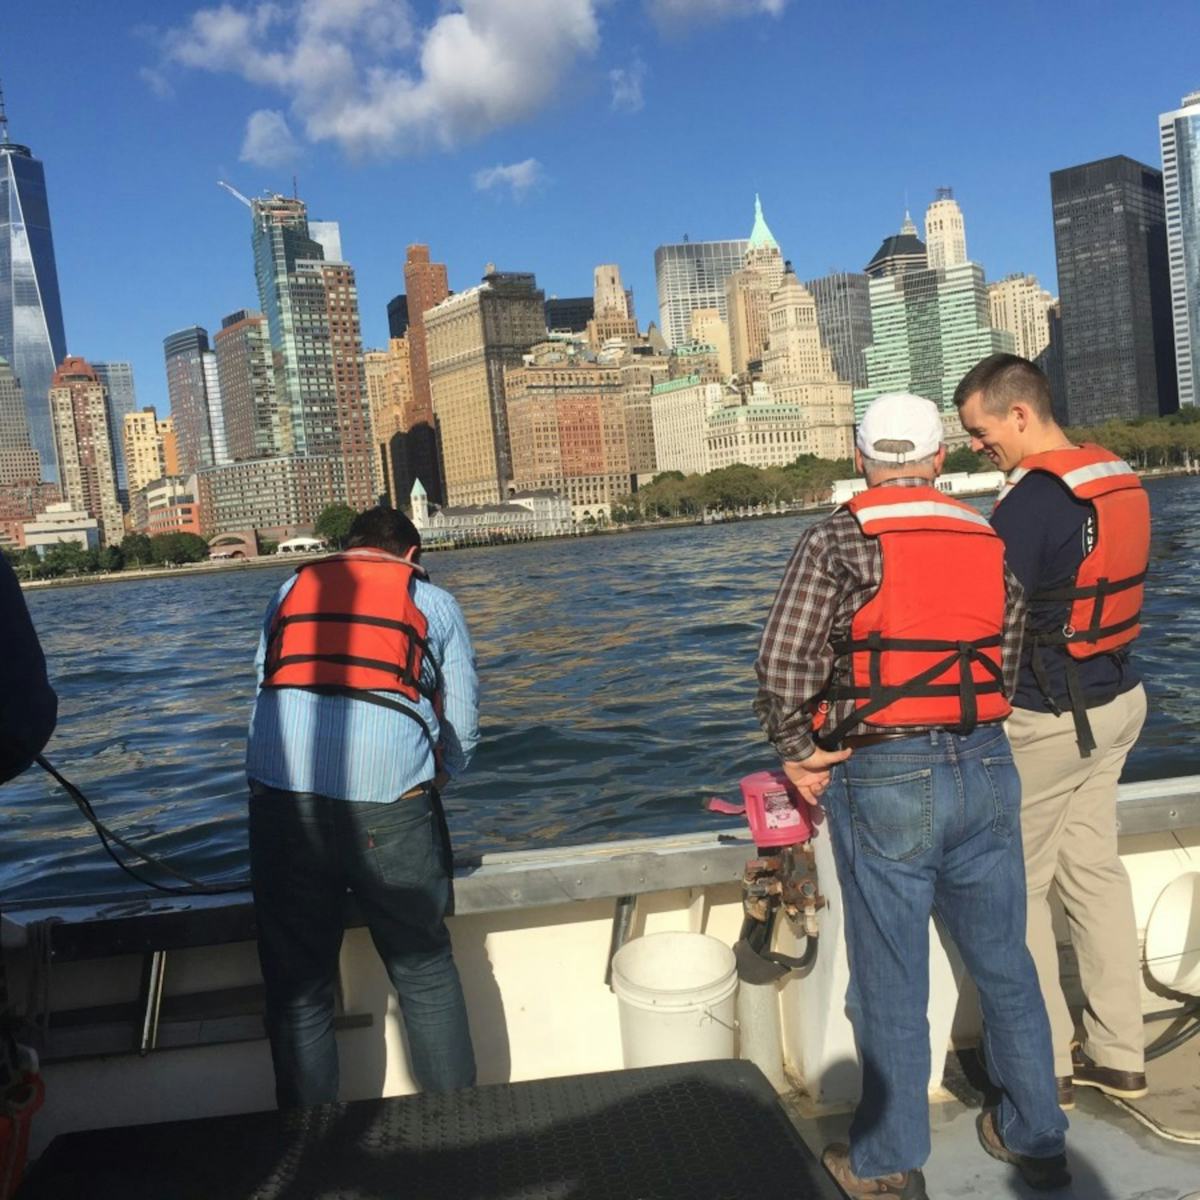 Maritime Security Center team working next to the Hudson River overlooking New York City's skyline